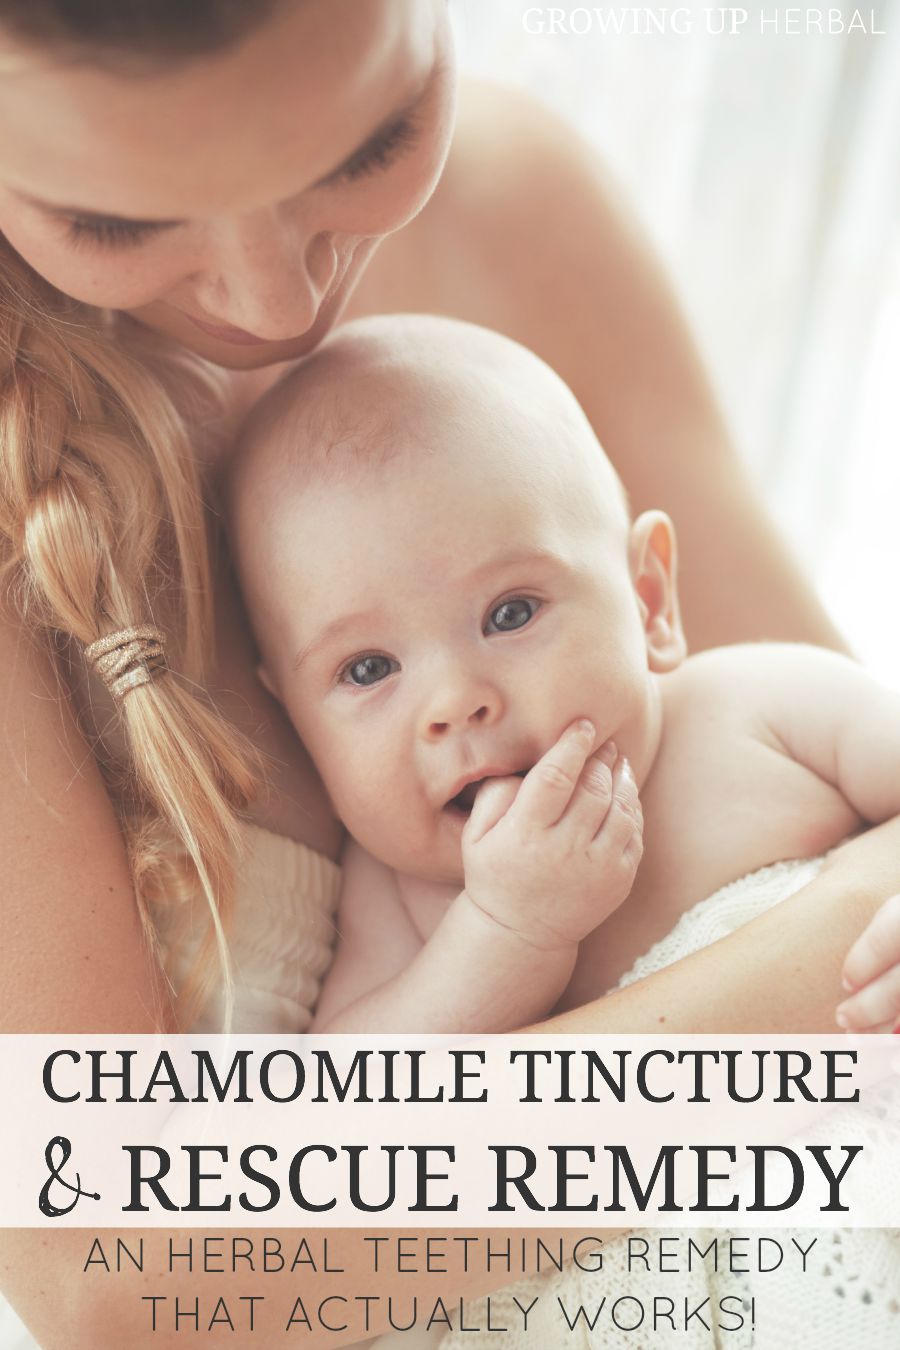 An Herbal Teething Remedy That Actually Works | GrowingUpHerbal.com - having a teething baby is no fun. Here's a natural, herbal remedy that actually provides relief!